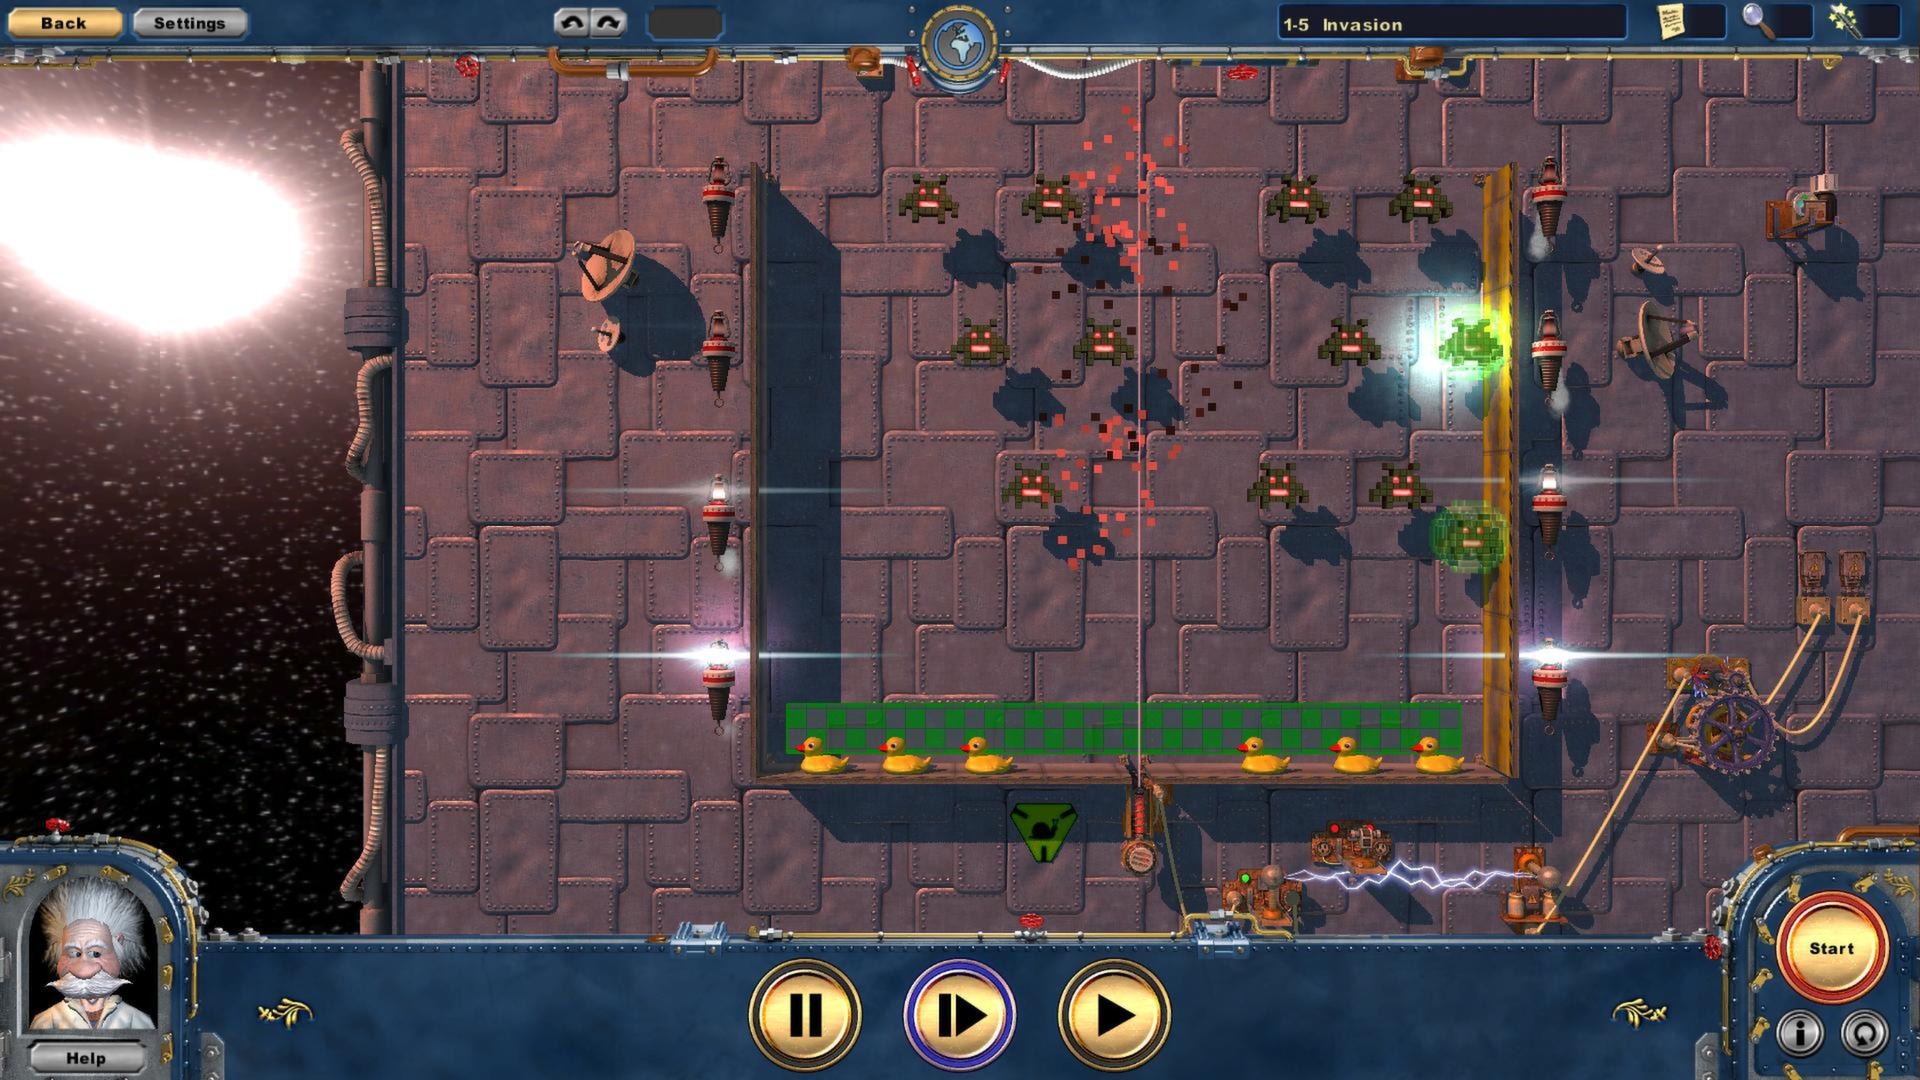 Crazy Machines 2: Invaders From Space, 2nd Wave DLC Featured Screenshot #1